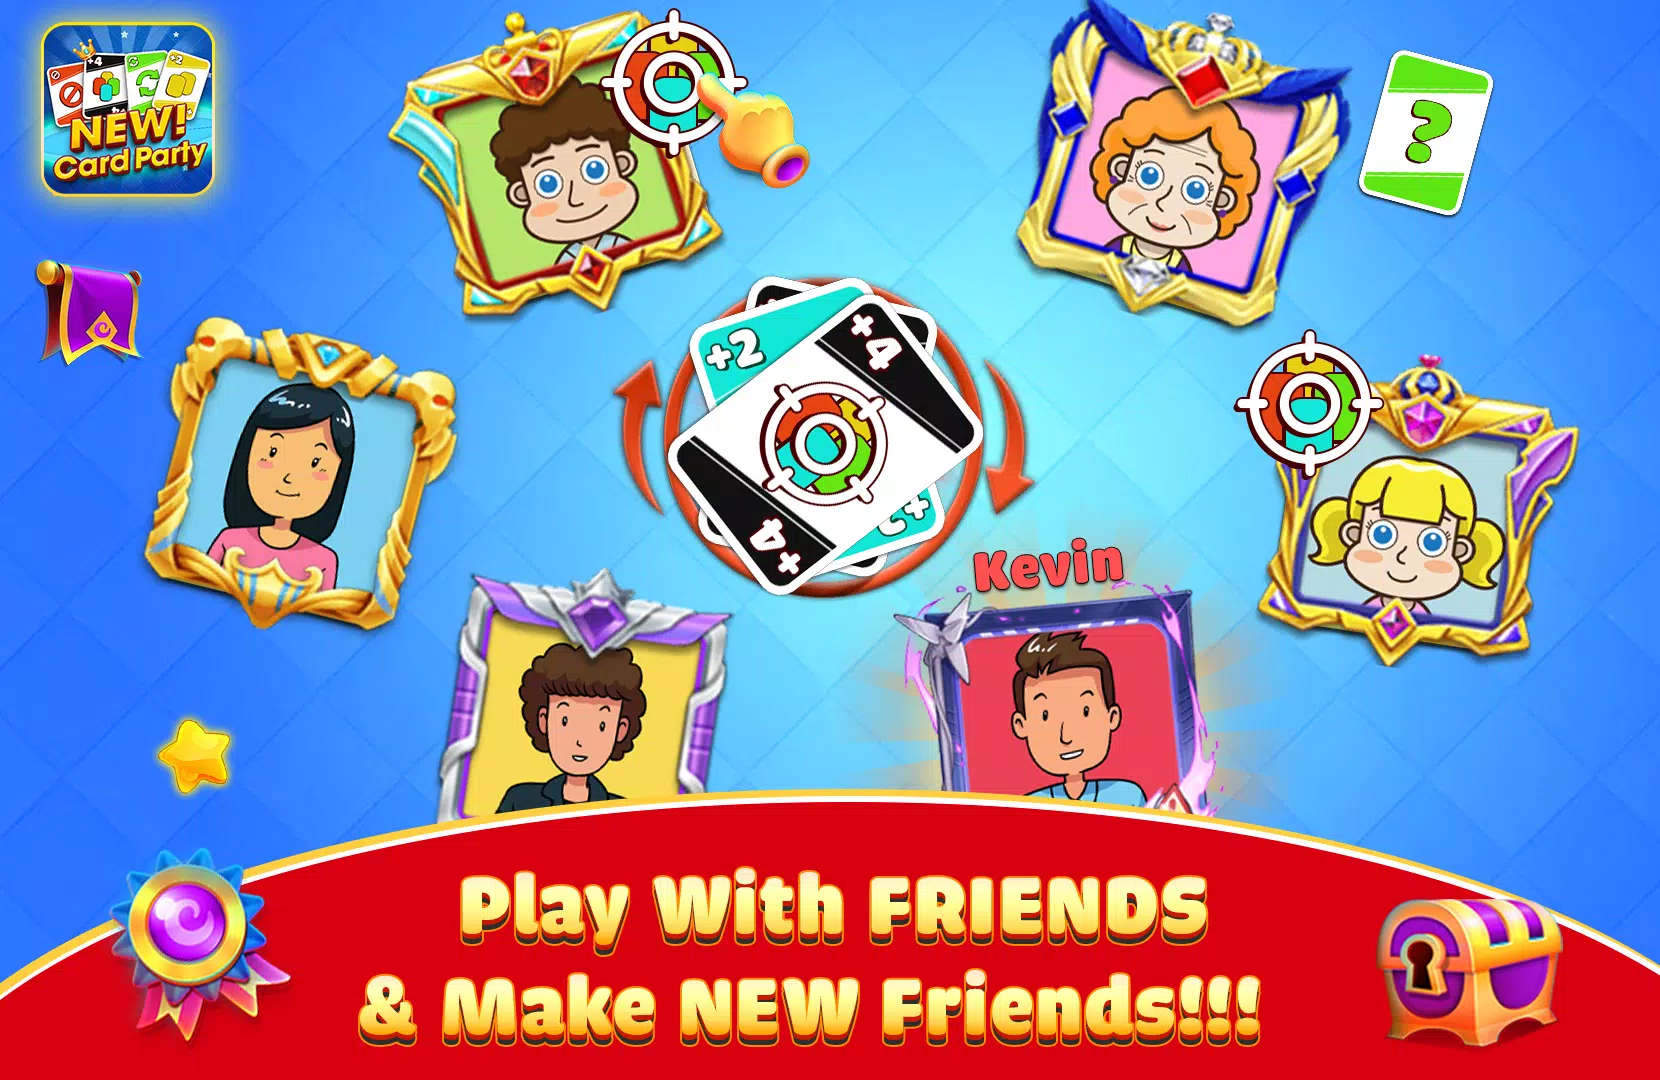 Uno - Party Card Game Apk Download for Android- Latest version 2.3.1-  partygame.free.cardgame.uno